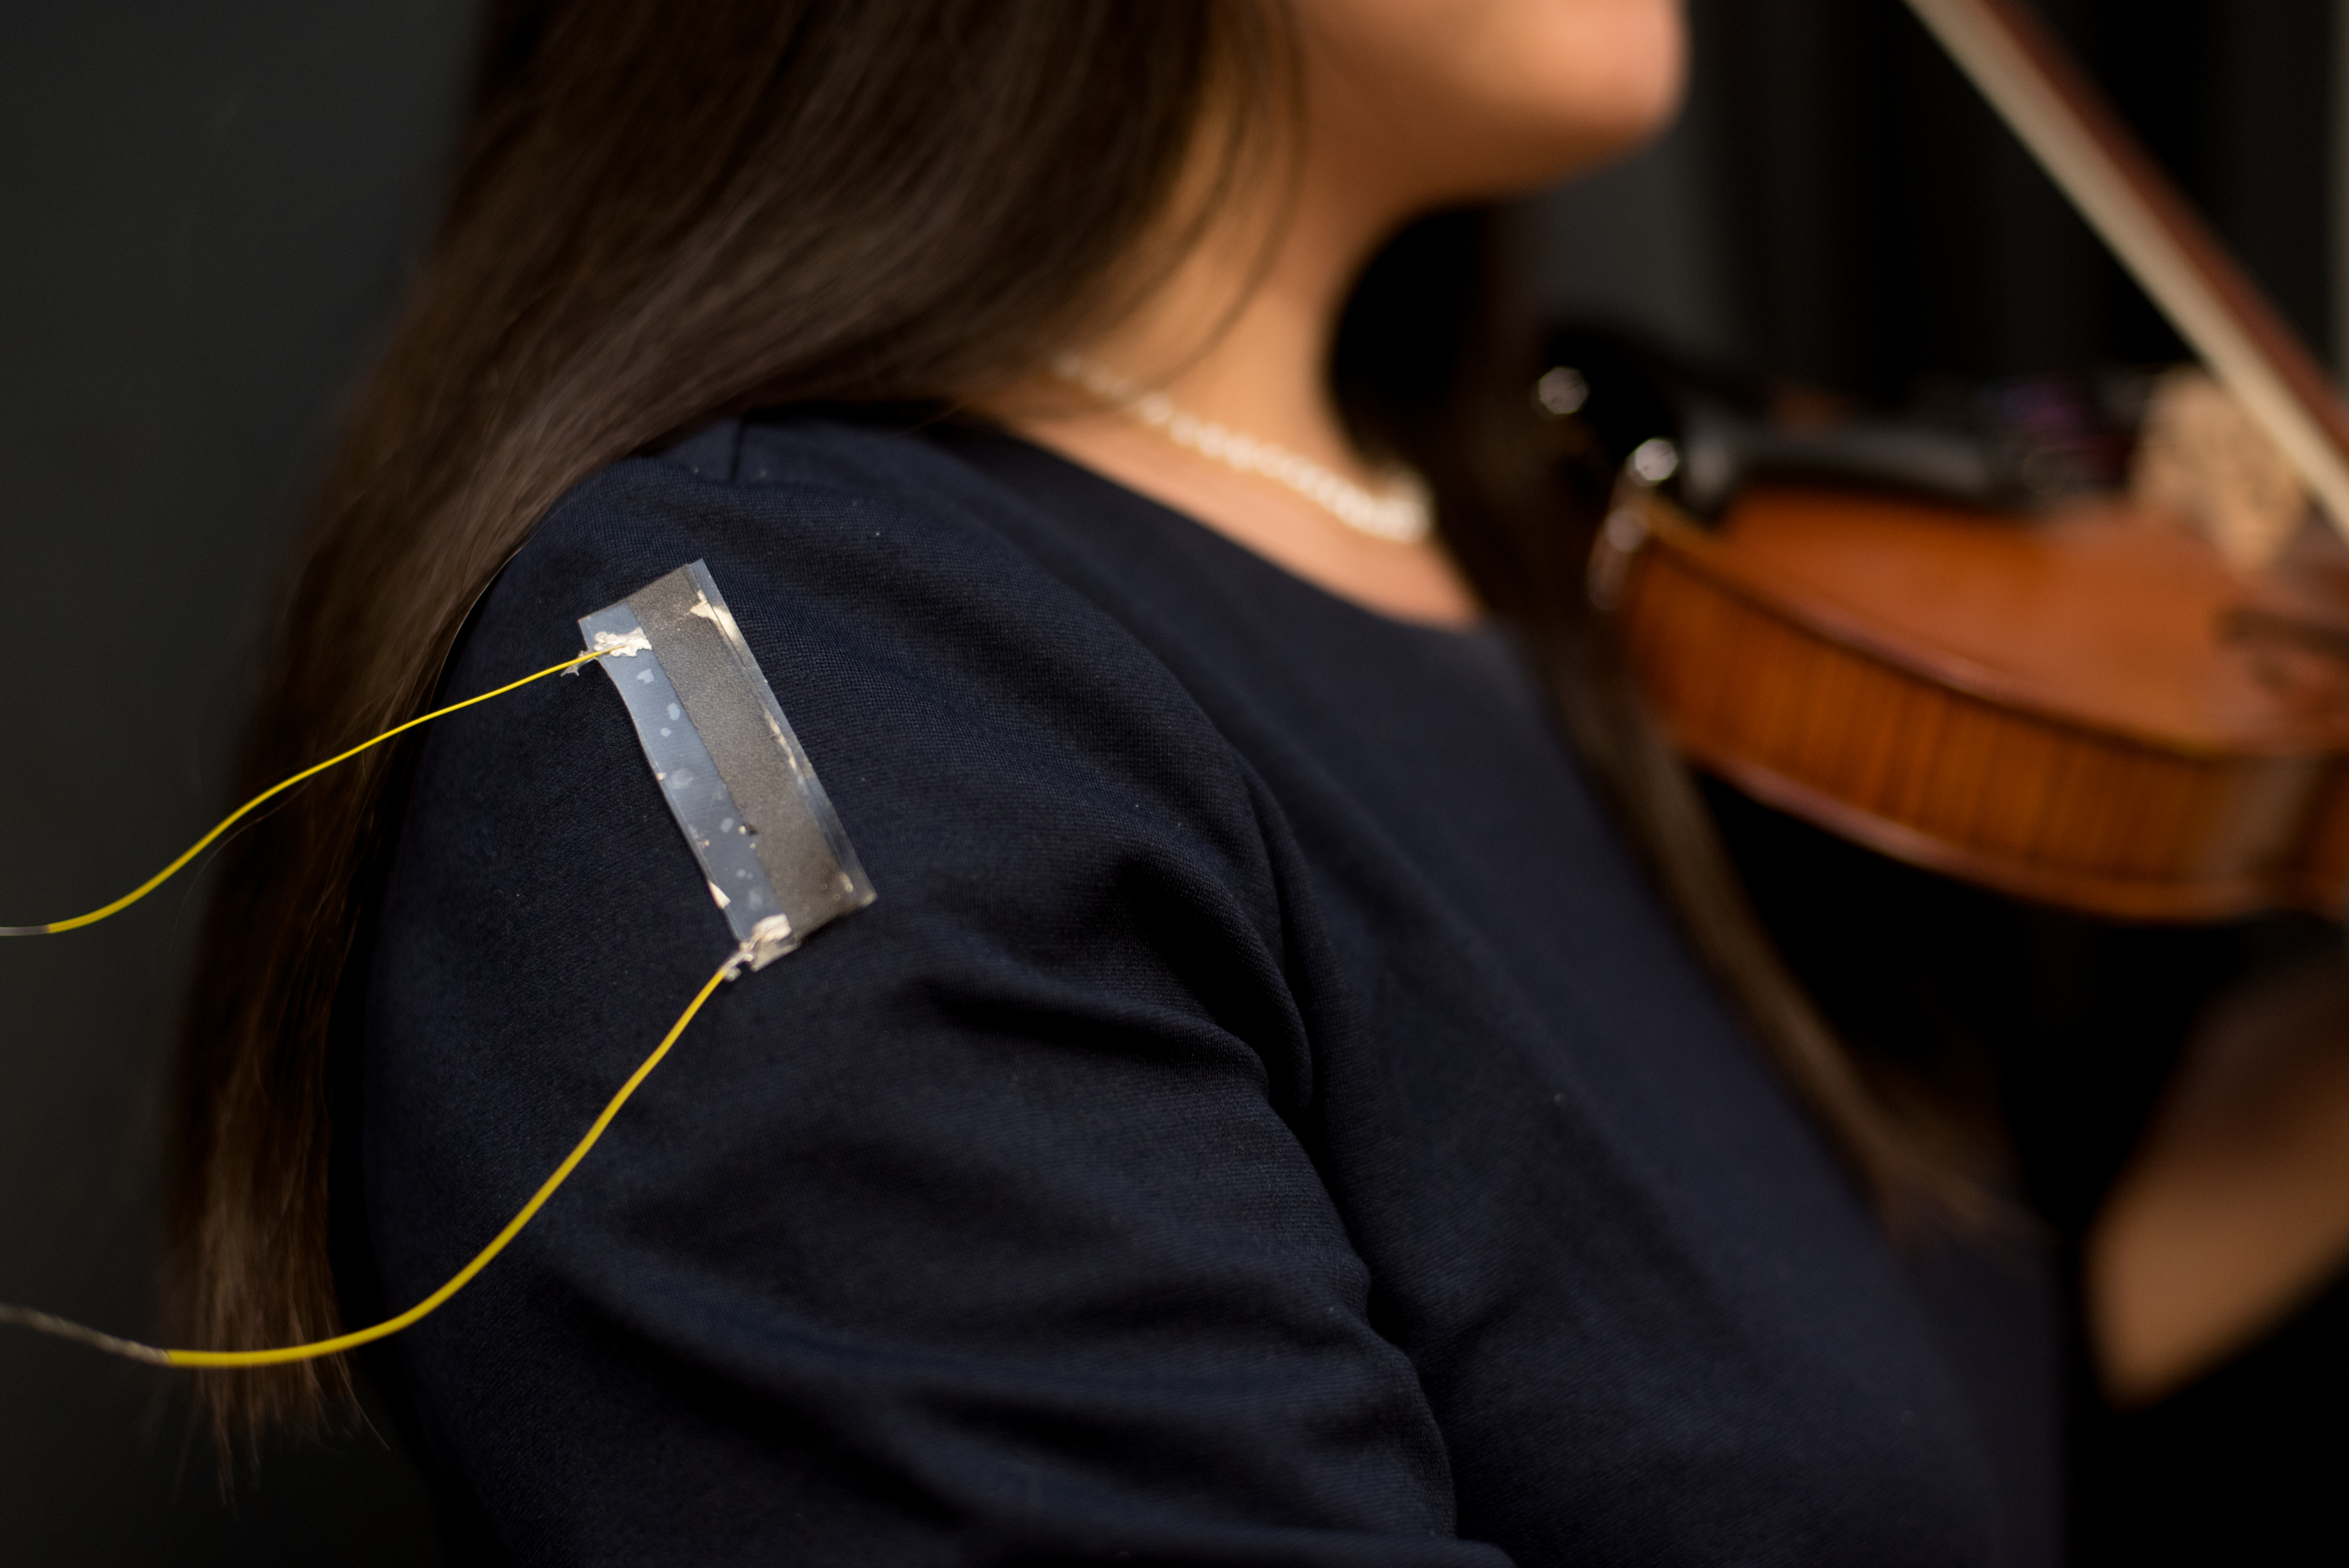 Thin adhesive film and two wires attached to a shoulder to display the flexible strain sensor